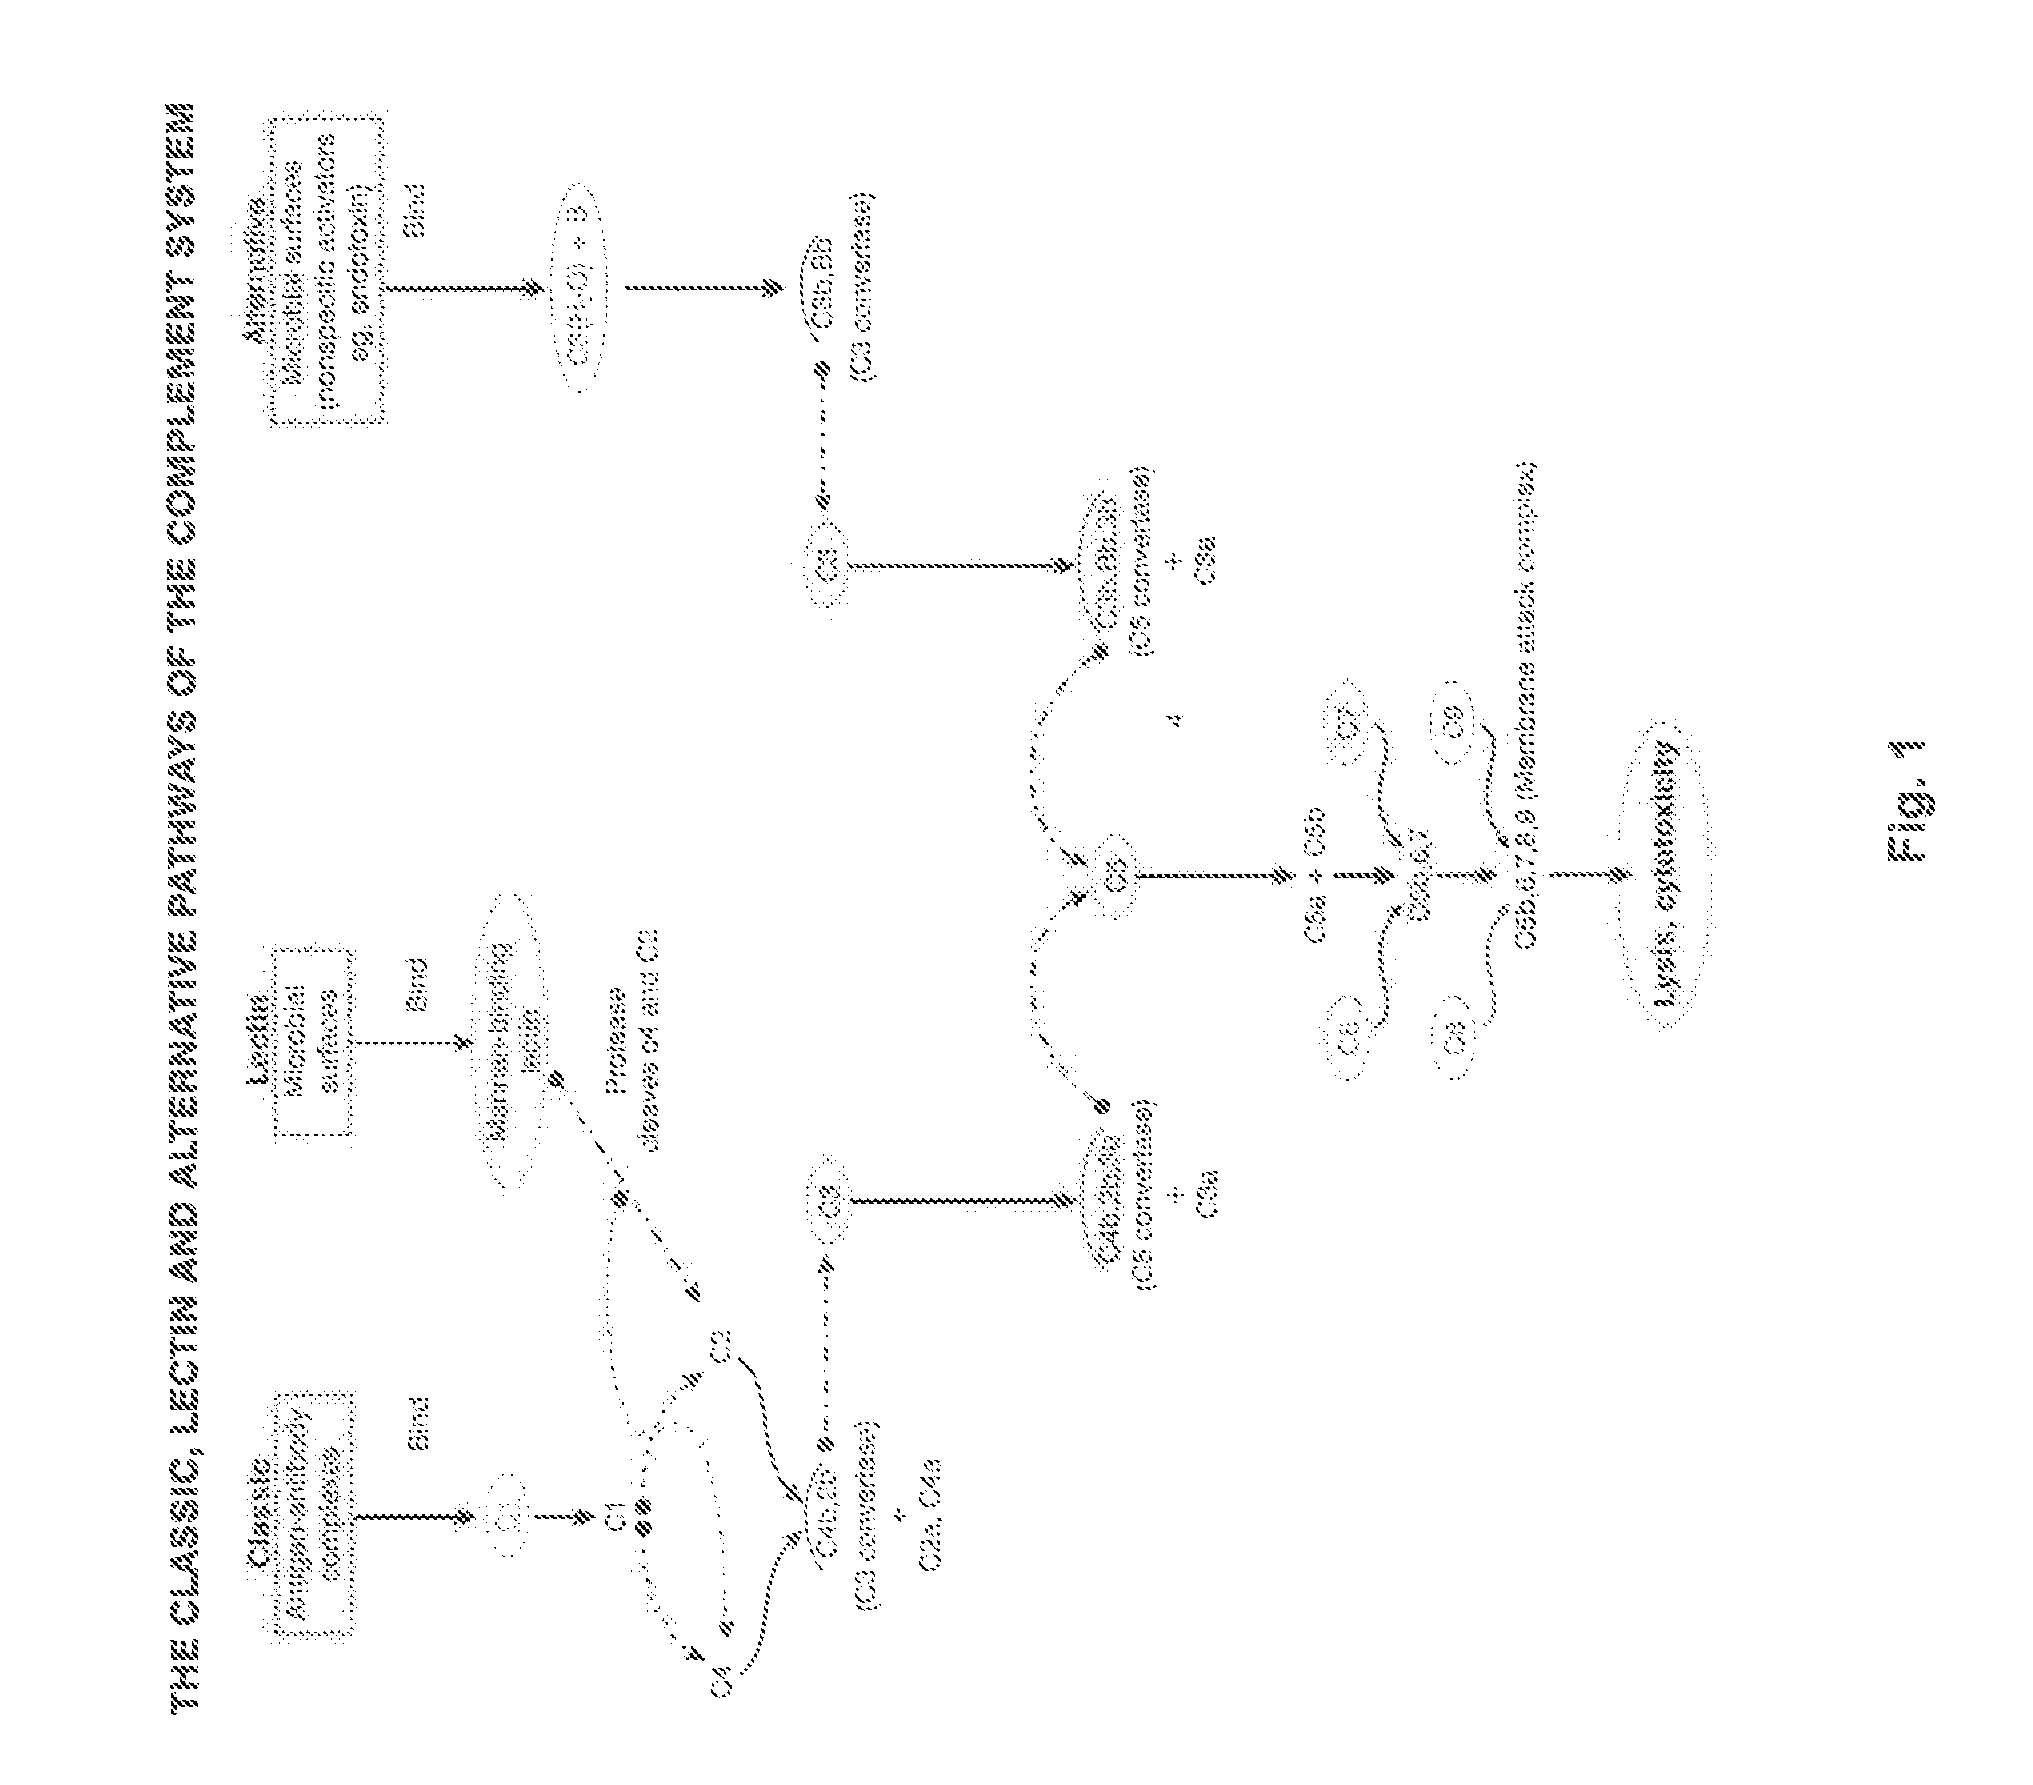 Immunogenic composition and method of developing a vaccine based on fusion protein